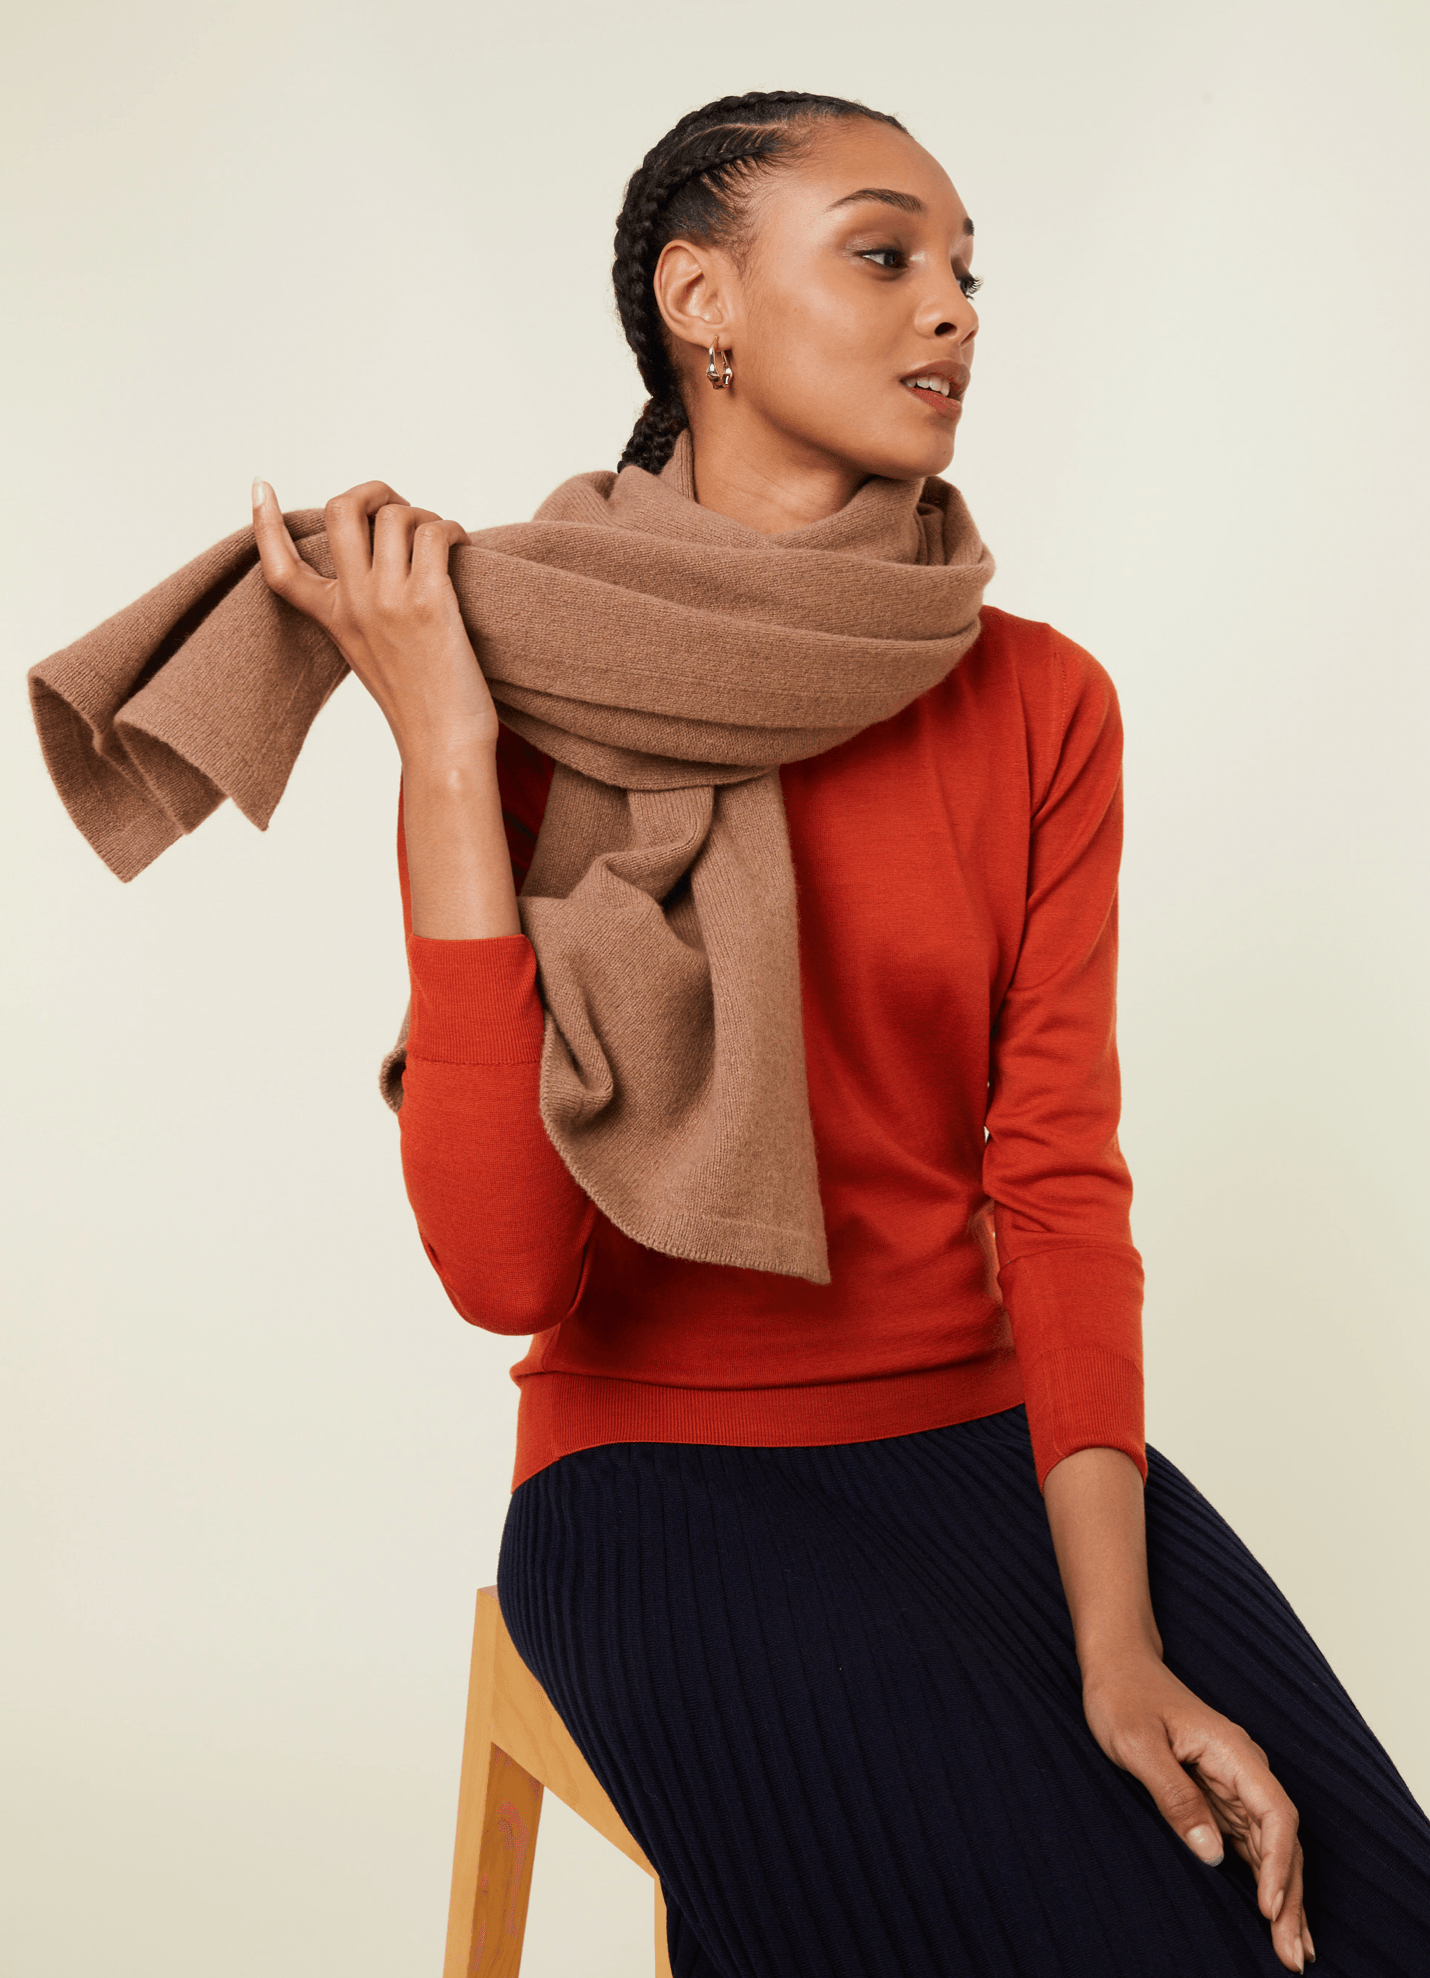 Gabrias Recycled Cashmere Scarf Travel Wrap by Maison Montagut (Various Colors) - Haven